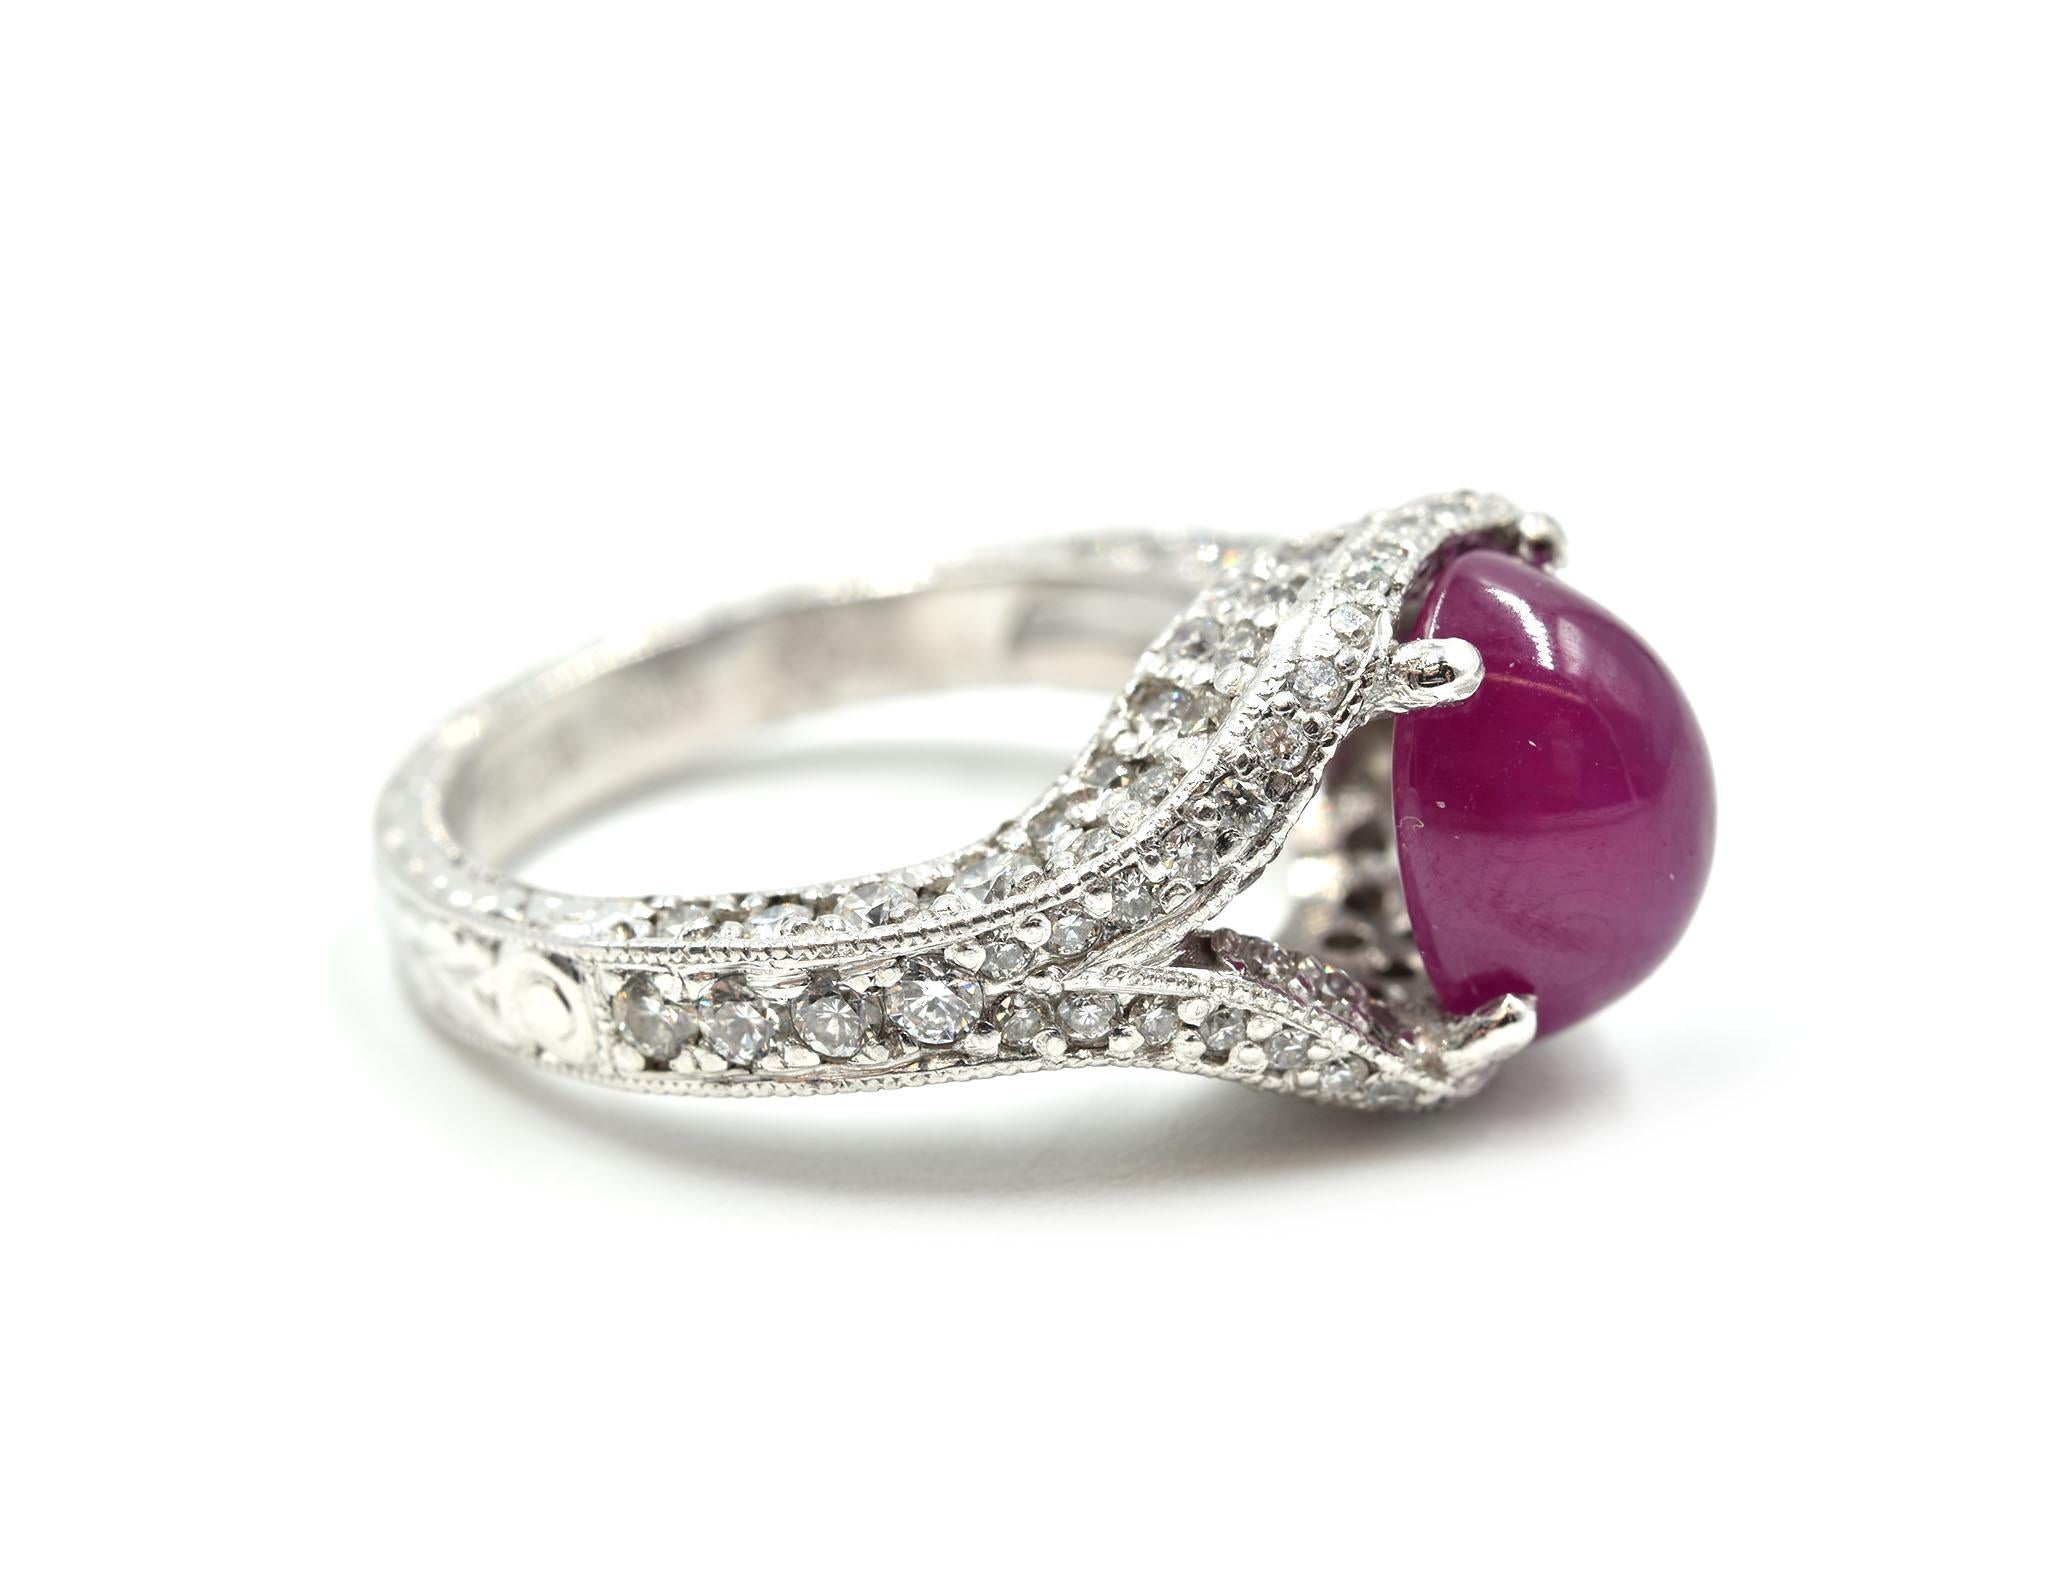 Designer: custom design
Material: platinum
Ruby: one cabochon cut ruby 3.00 carat weight 
Diamonds: 110 round brilliant cuts = 1.60 carat total weight
Color: G
Clarity: VS
Dimensions: ring top is 3/5-inches long
Ring Size: 4 ¾ (please allow two